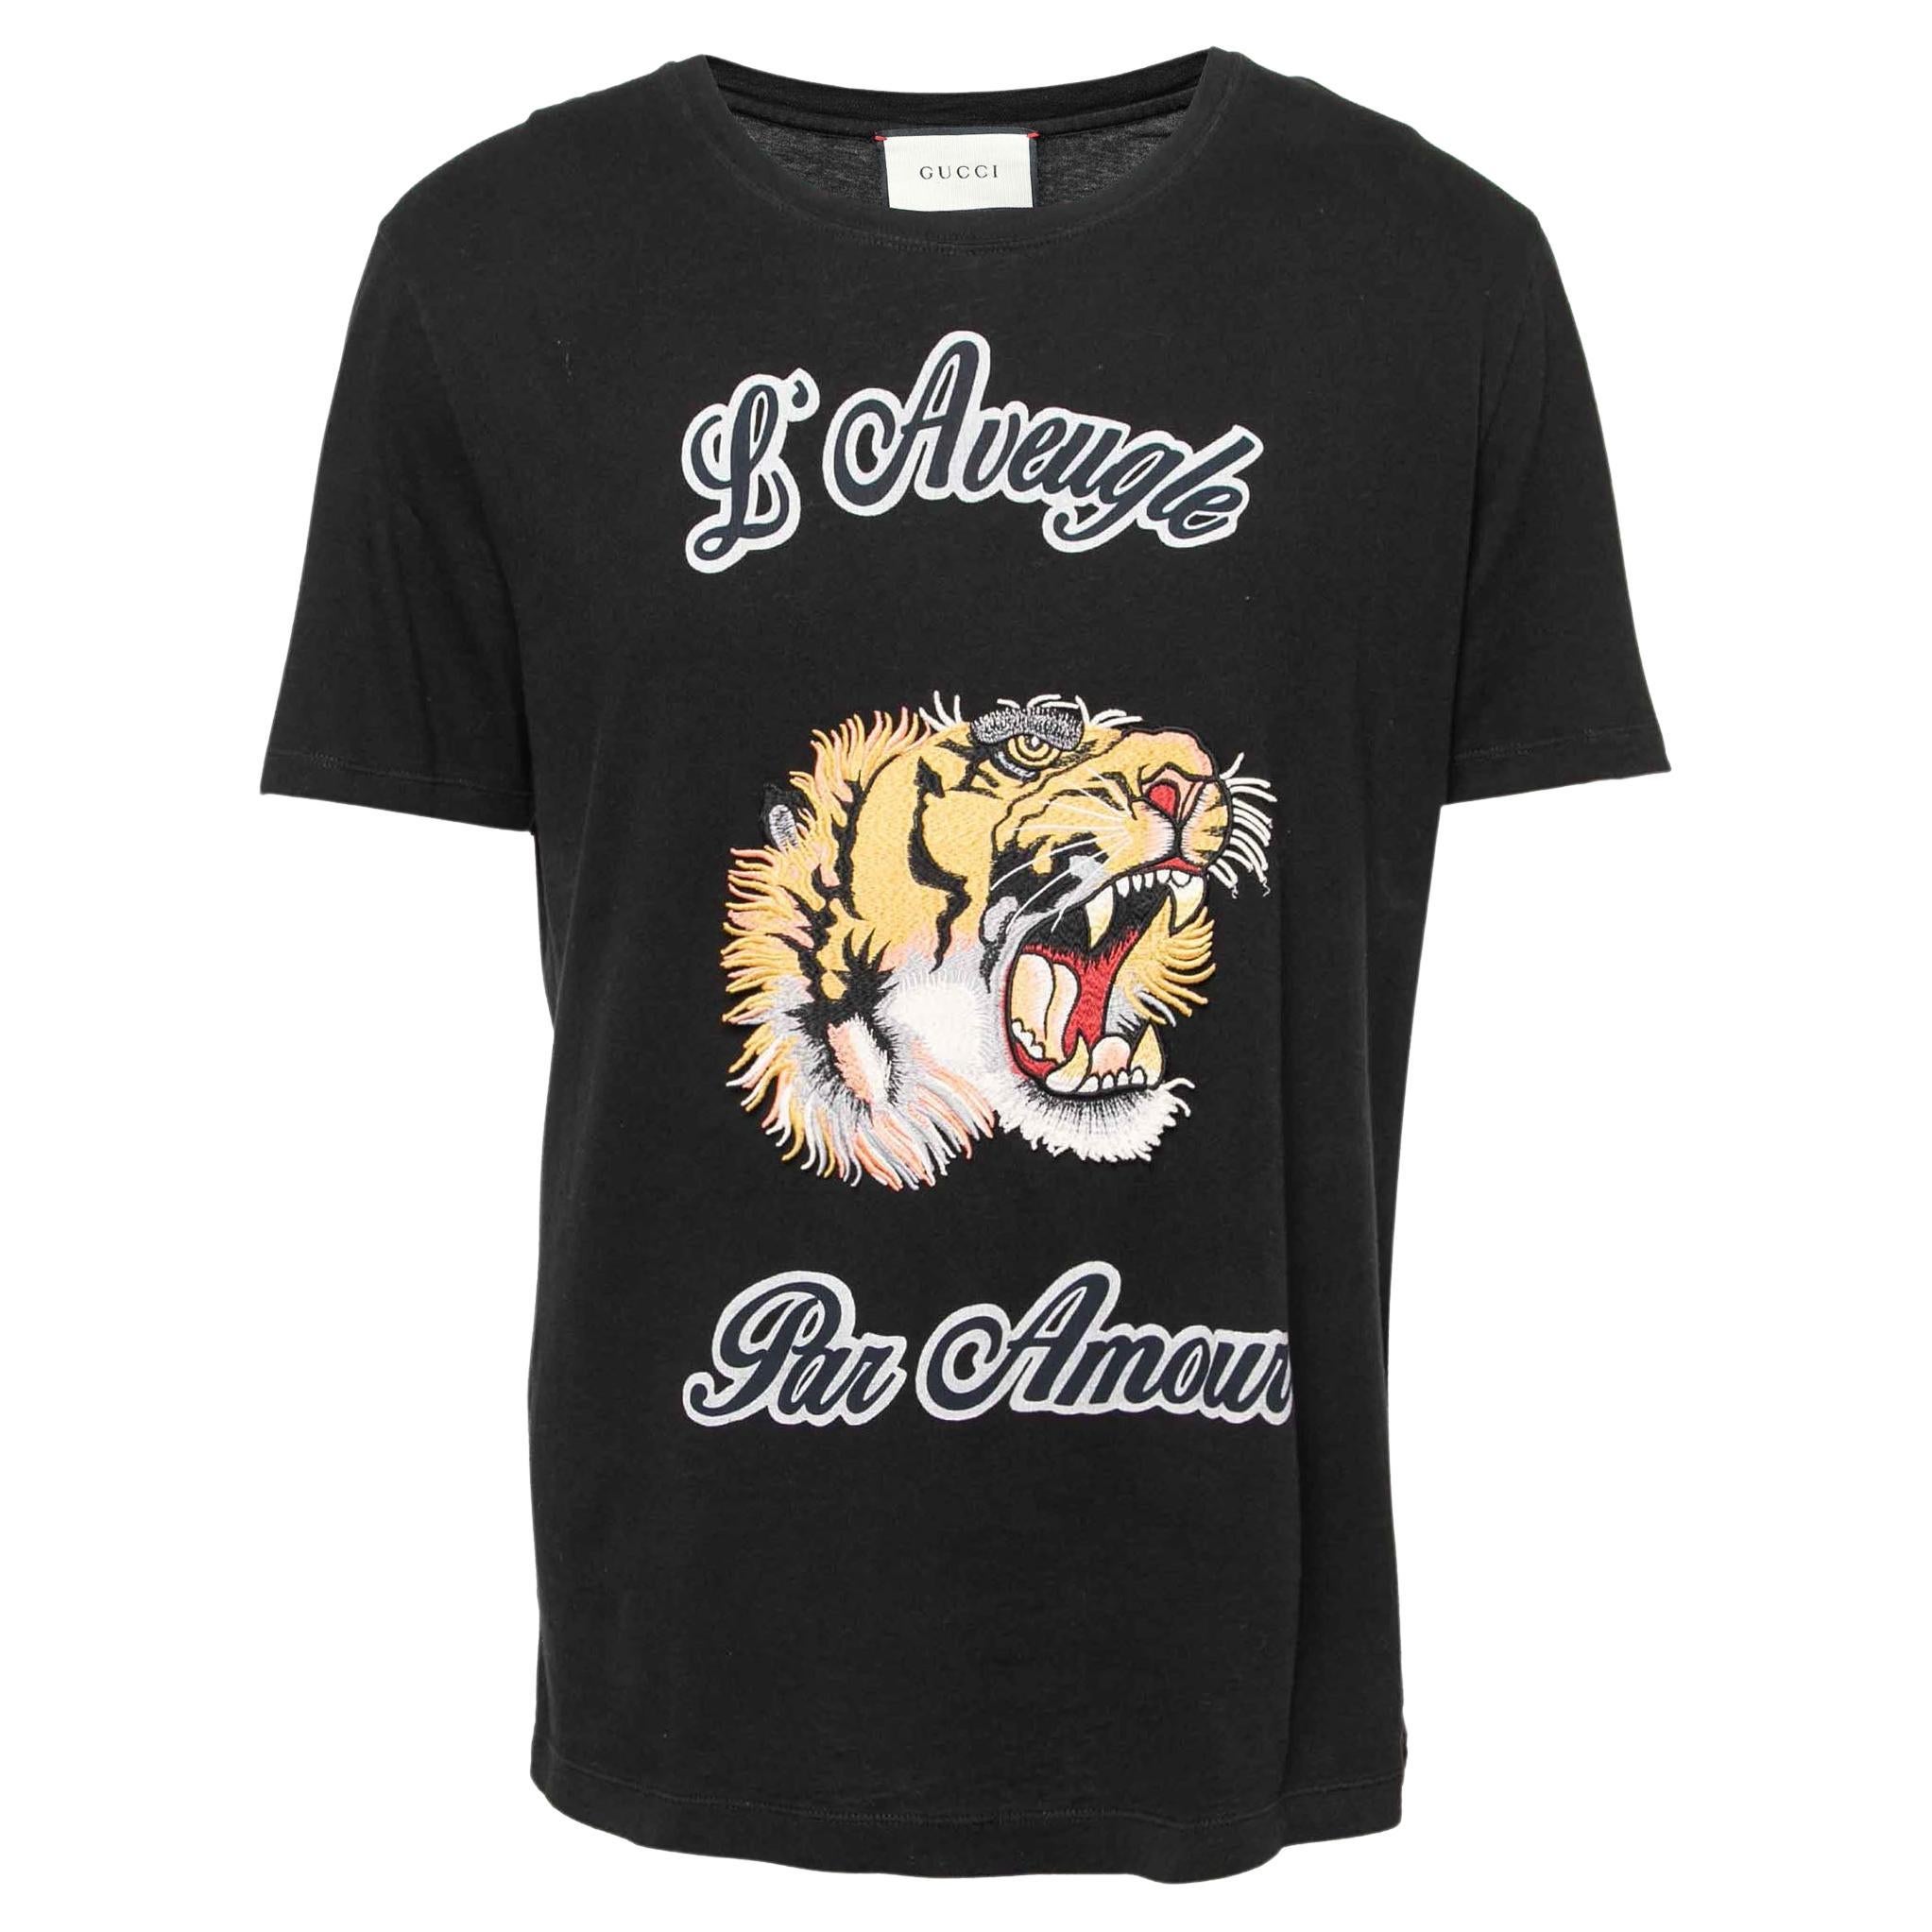 Versace Jeans Black/Gold Tiger T-Shirt - T-Shirts from